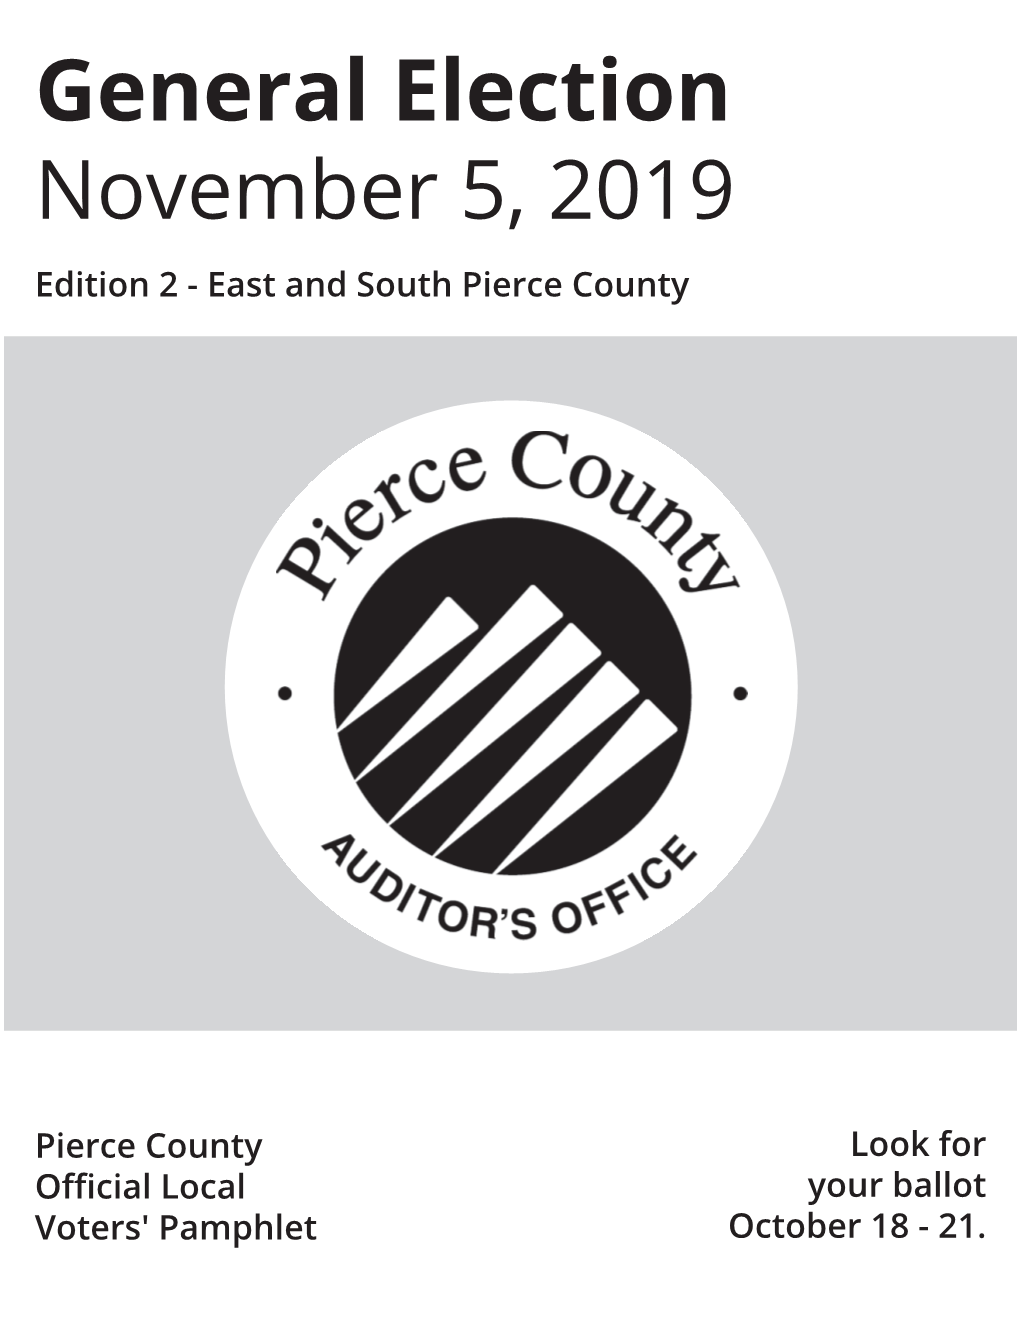 General Election November 5, 2019 Edition 2 - East and South Pierce County